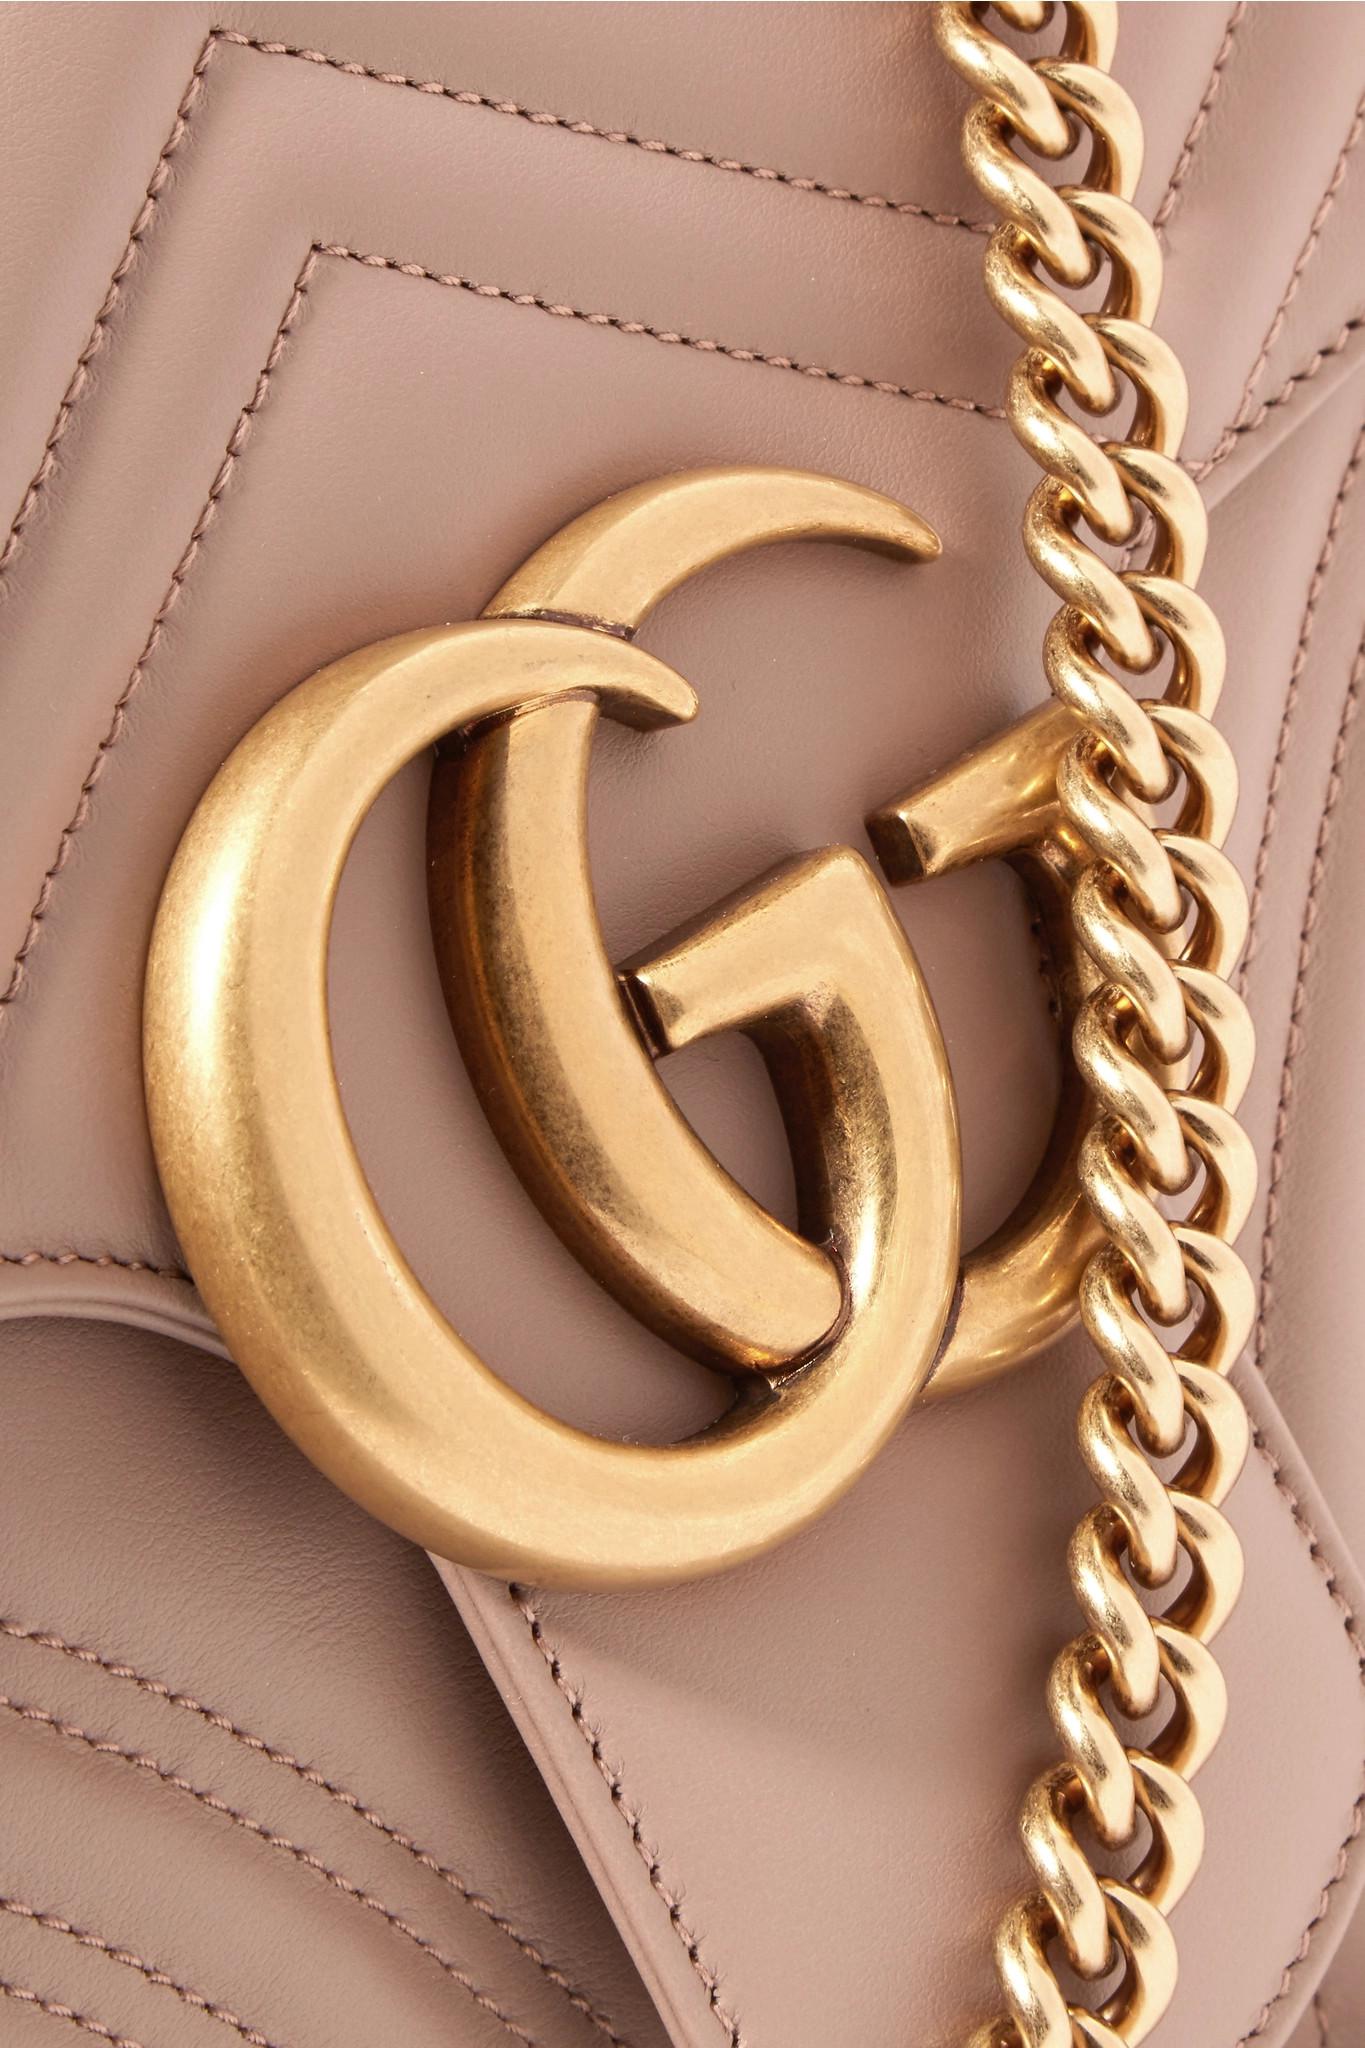 Gucci Gg Marmont Large Quilted Leather Shoulder Bag in Beige (Natural) - Lyst